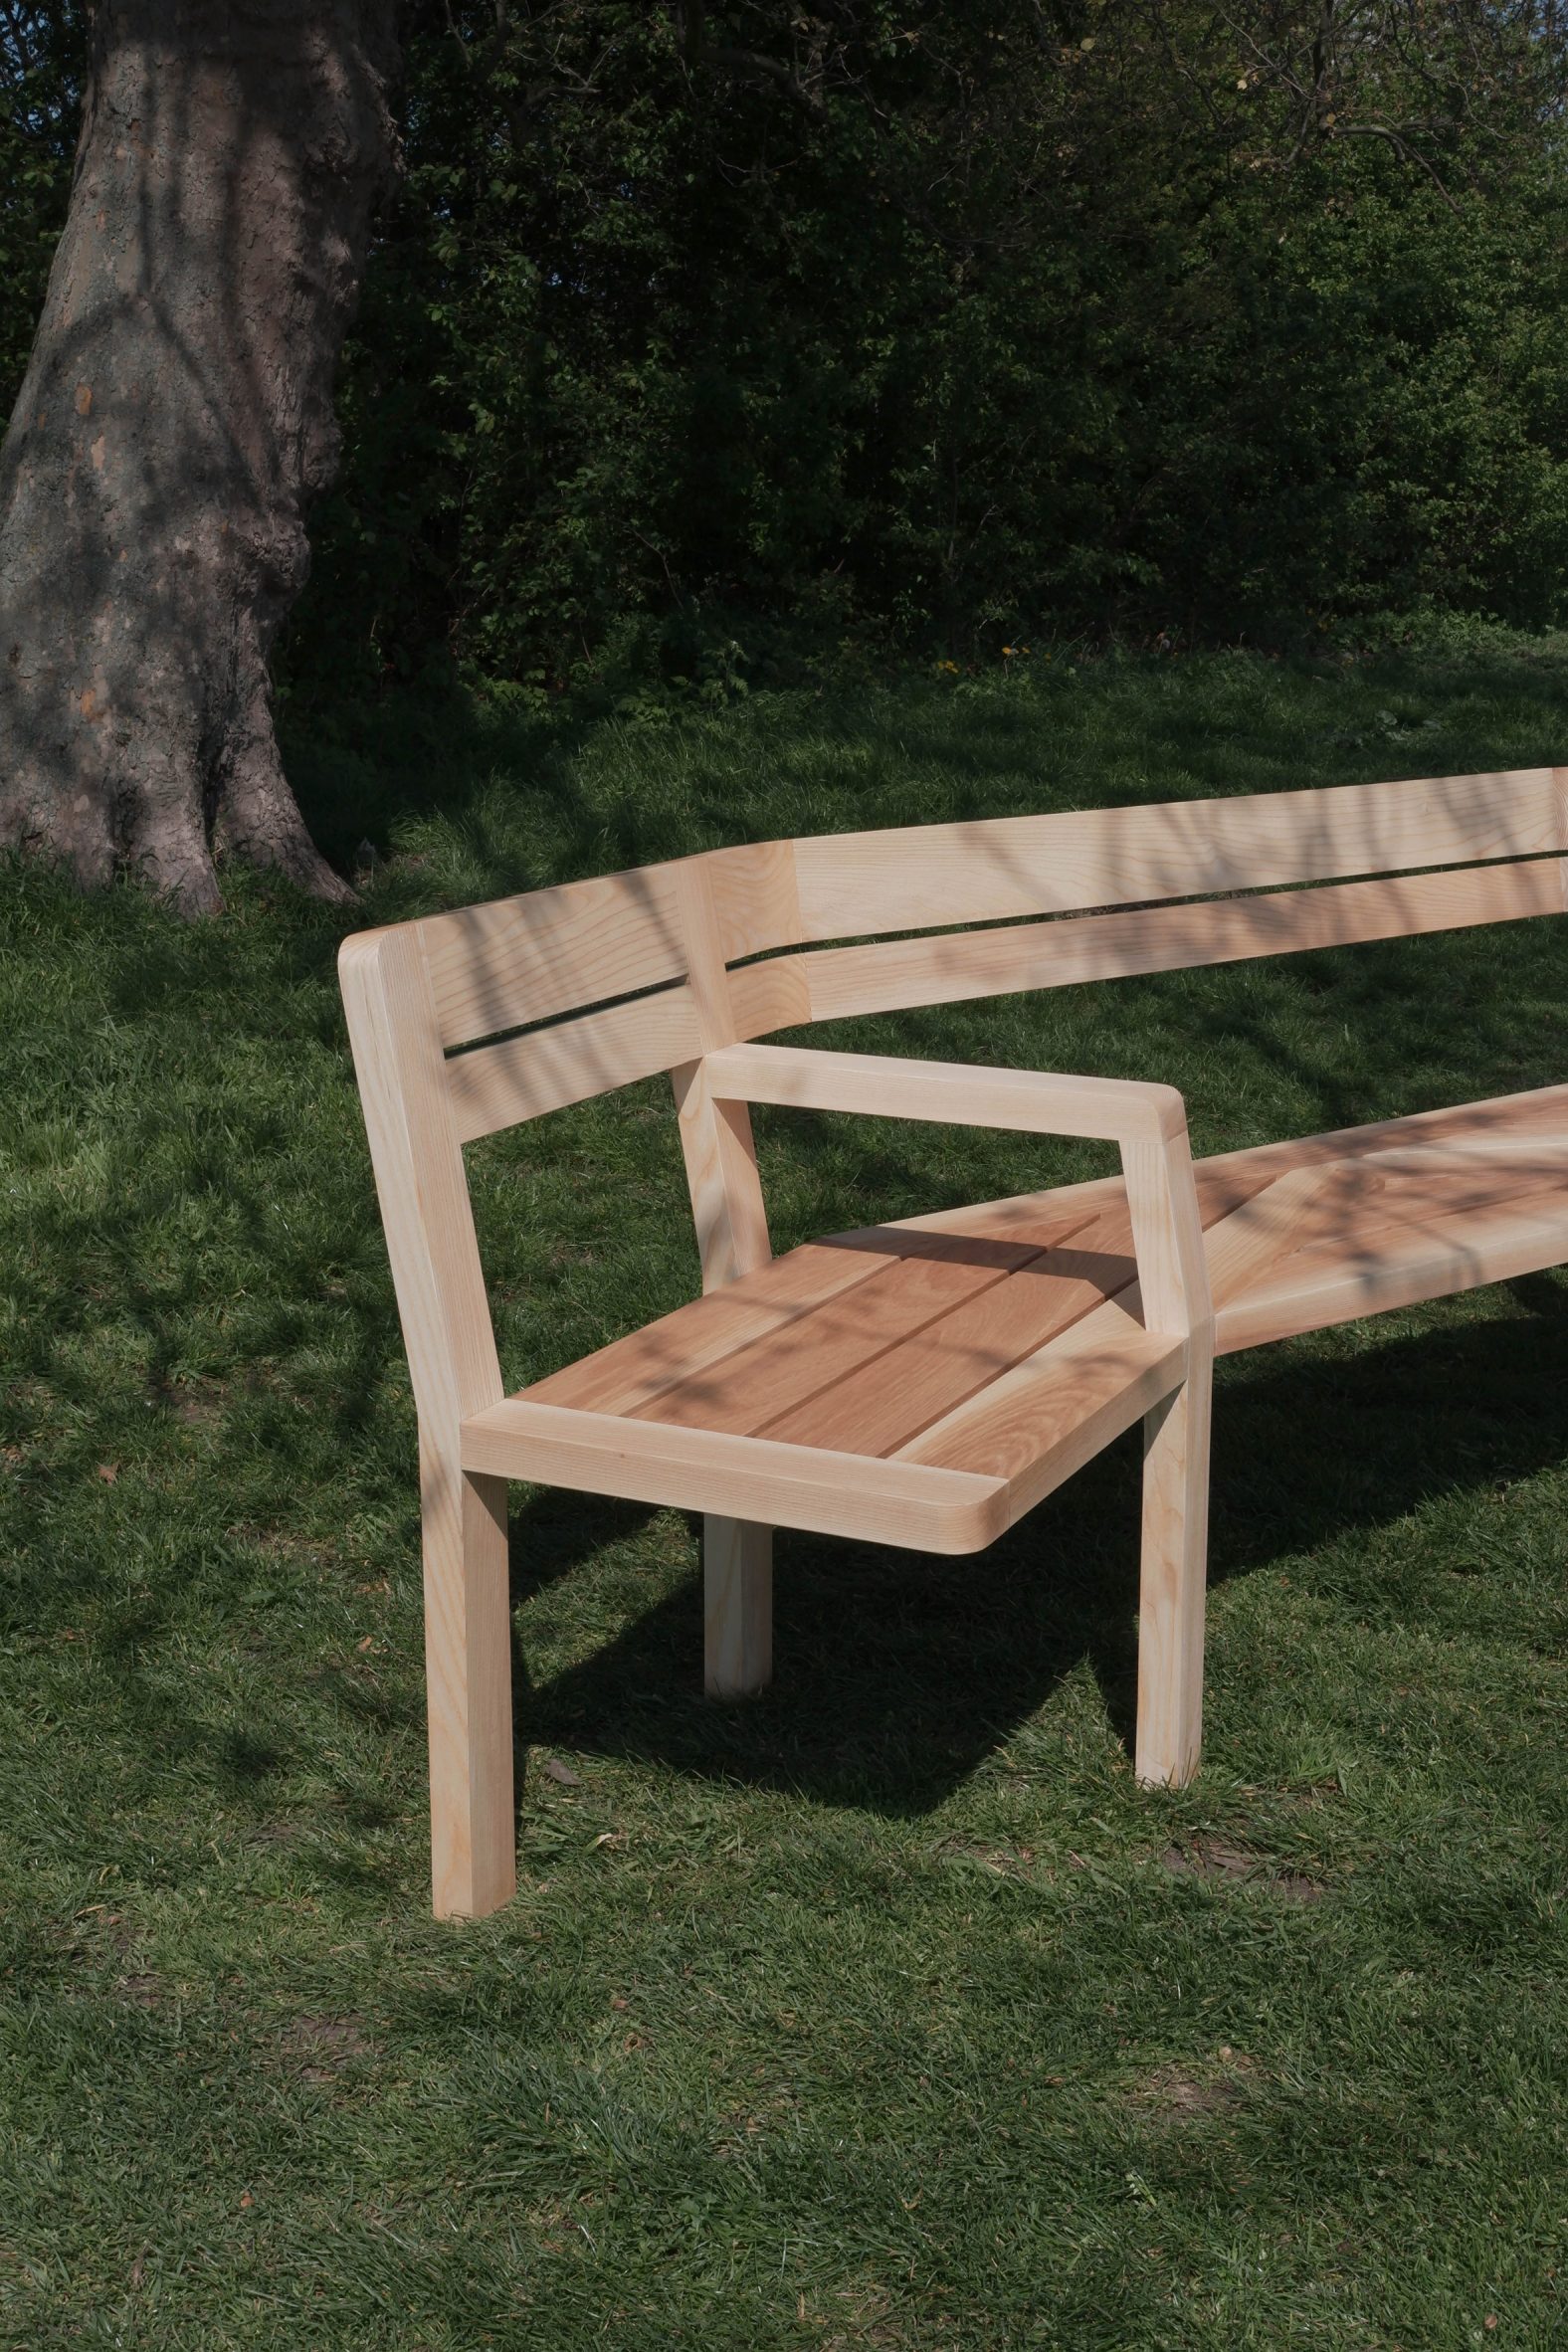 Wooden bench with angled seat